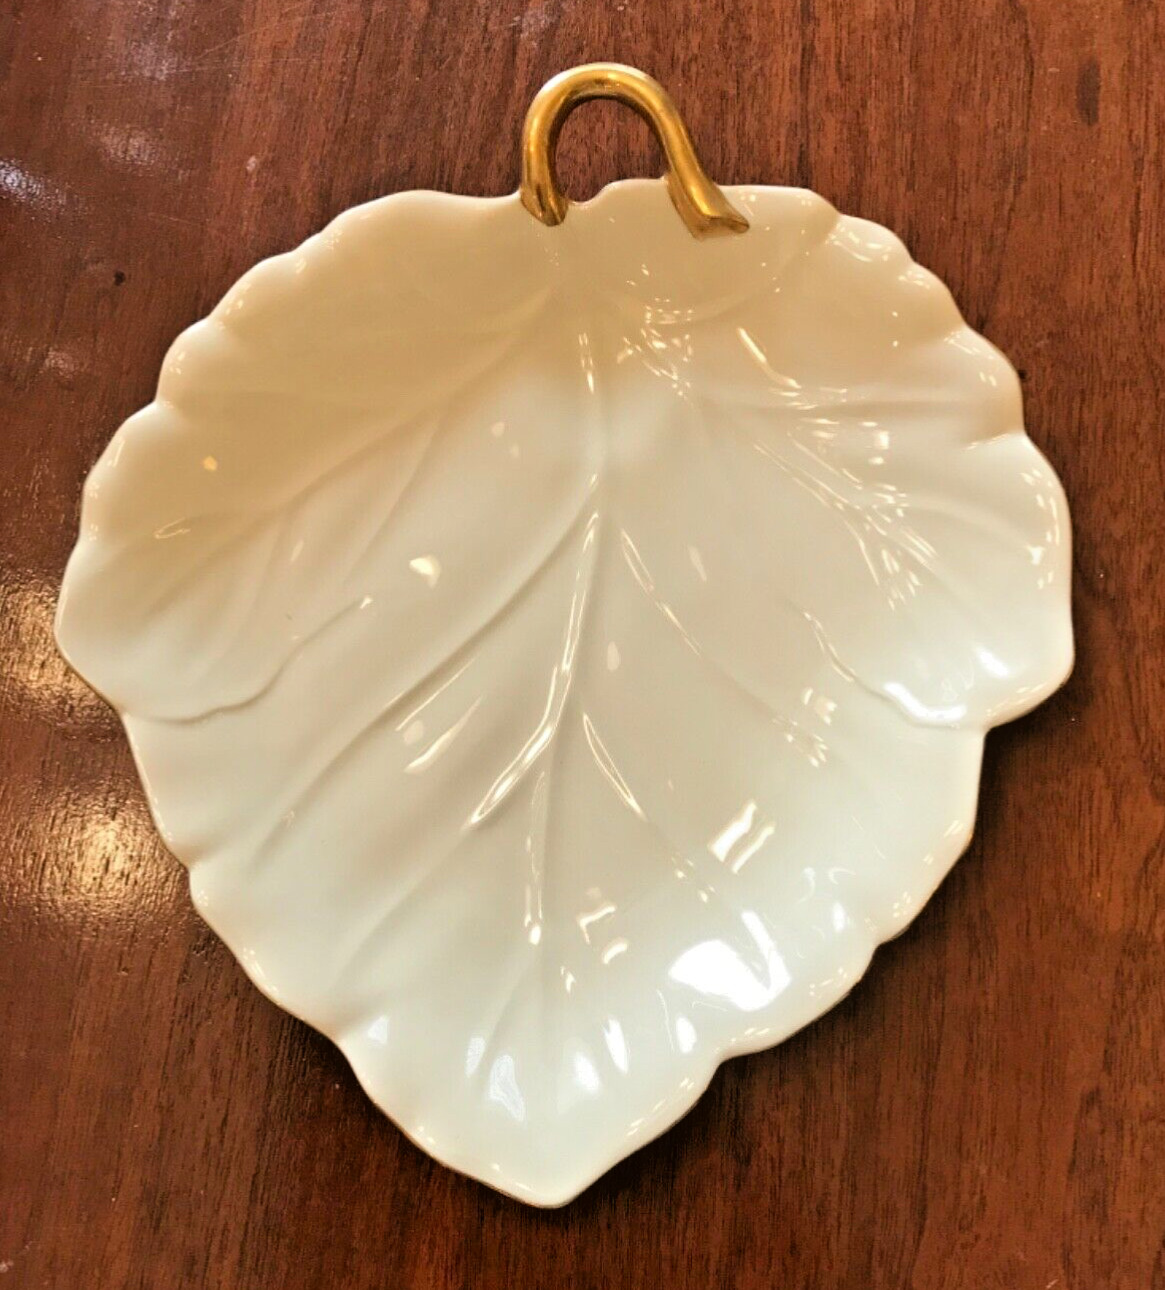 VTG TOYO JAPAN SIGNATURE COLLECTION LEAF TRAY / PLATTER EMBOSSED CREAM GOLD EUC